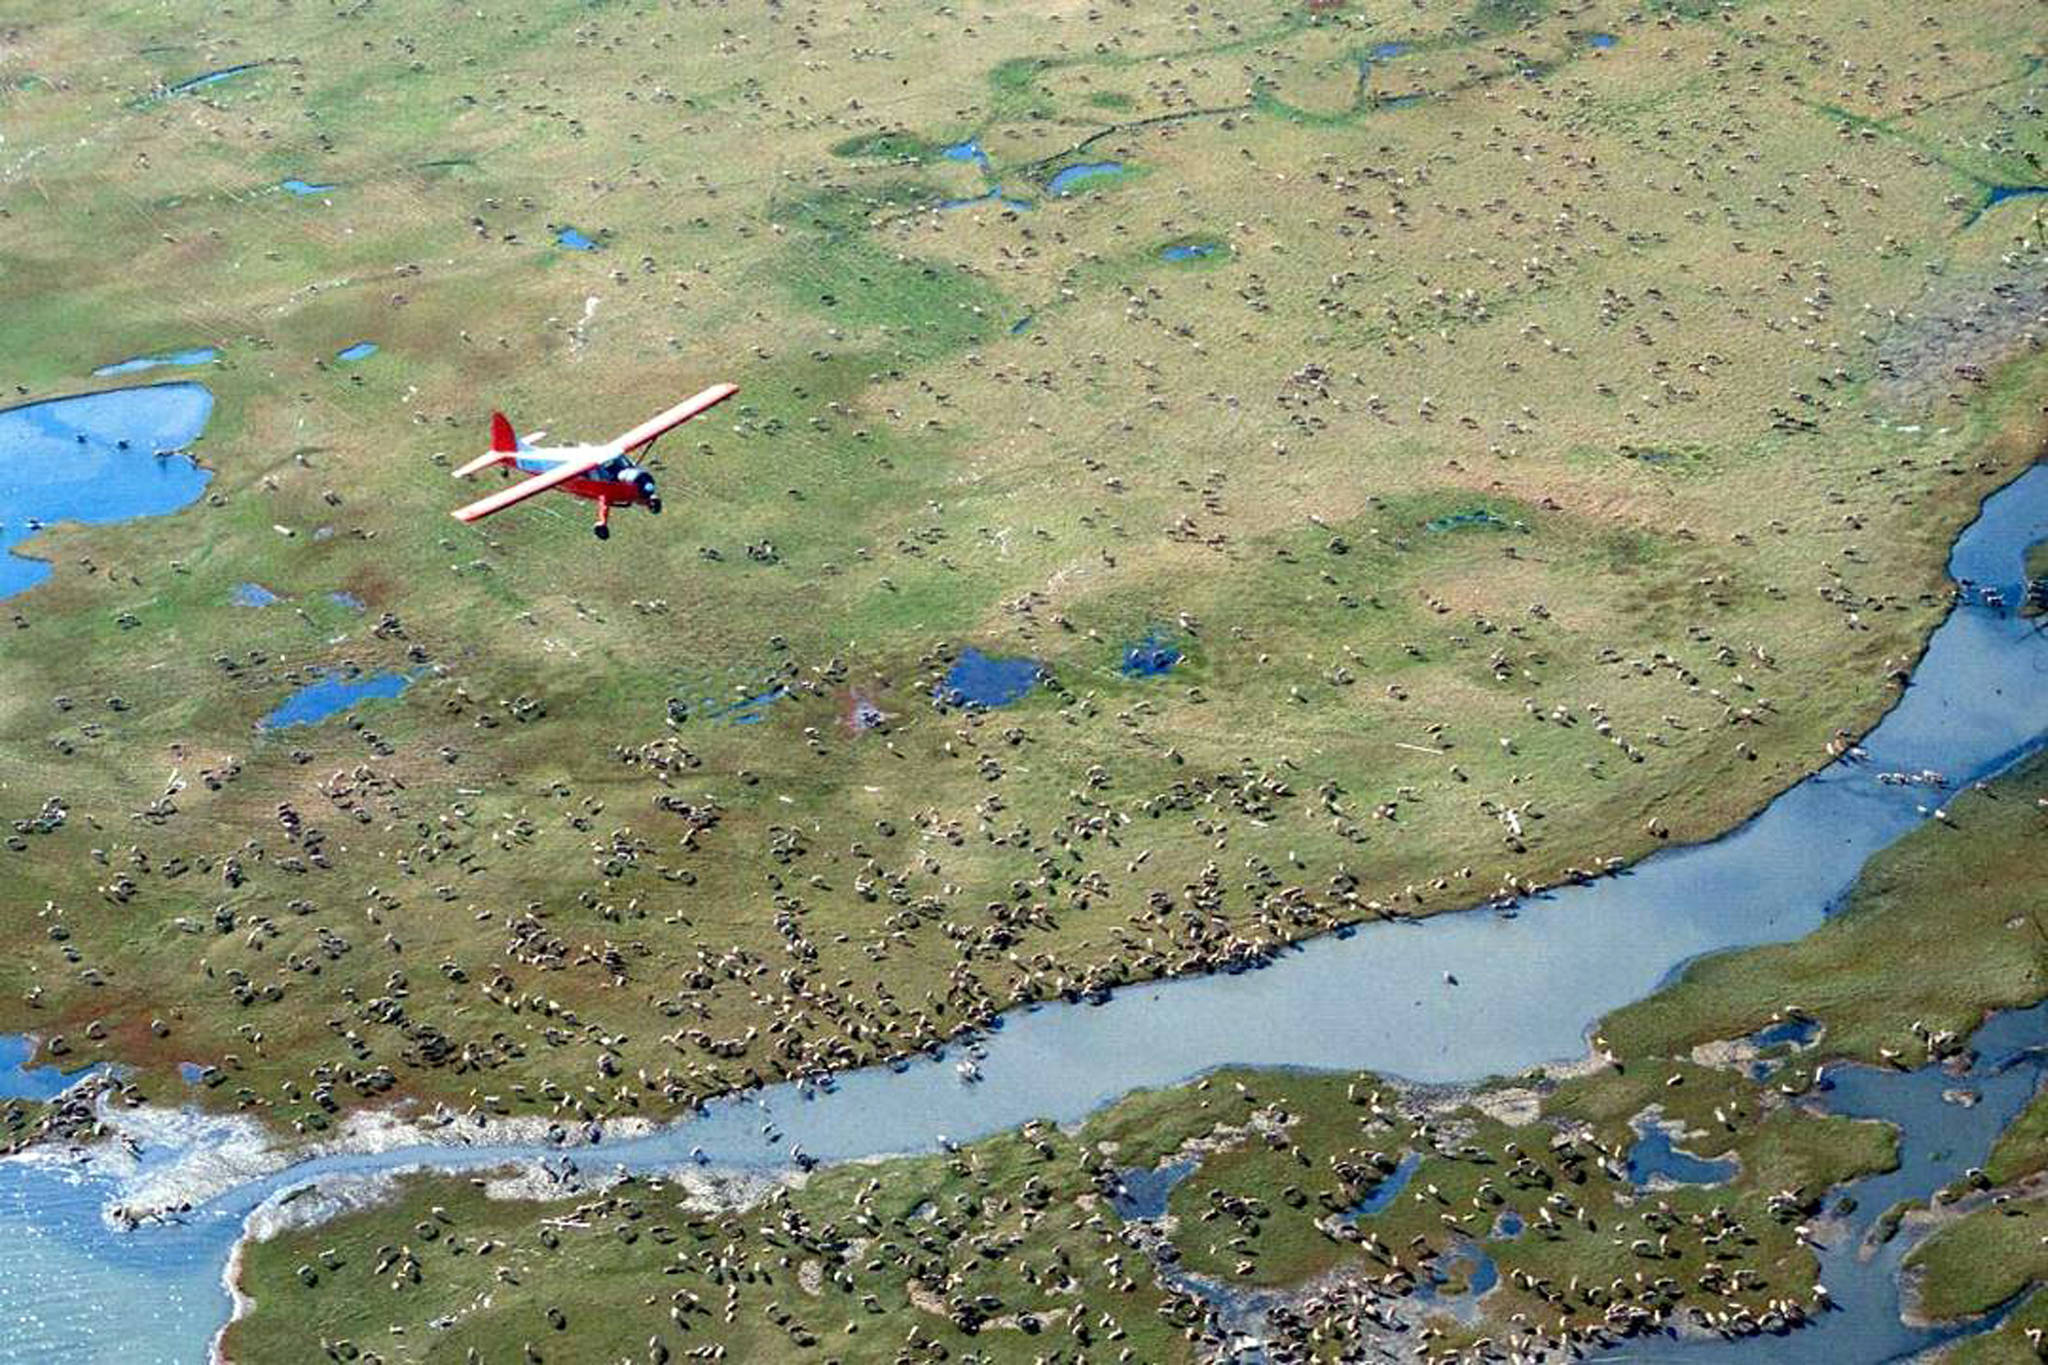 In this undated photo provided by the U.S. Fish and Wildlife Service, an airplane flies over caribou from the Porcupine Caribou Herd on the coastal plain of the Arctic National Wildlife Refuge in northeast Alaska.The Department of the Interior has approved an oil and gas leasing program within Alaska’s Arctic National Wildlife Refuge. The refuge is home to polar bears, caribou and other wildlife. Secretary of the Interior David Bernhardt signed the Record of Decision, which will determine where oil and gas leasing will take place in the refuge’s coastal plain. (U.S. Fish and Wildlife Service)